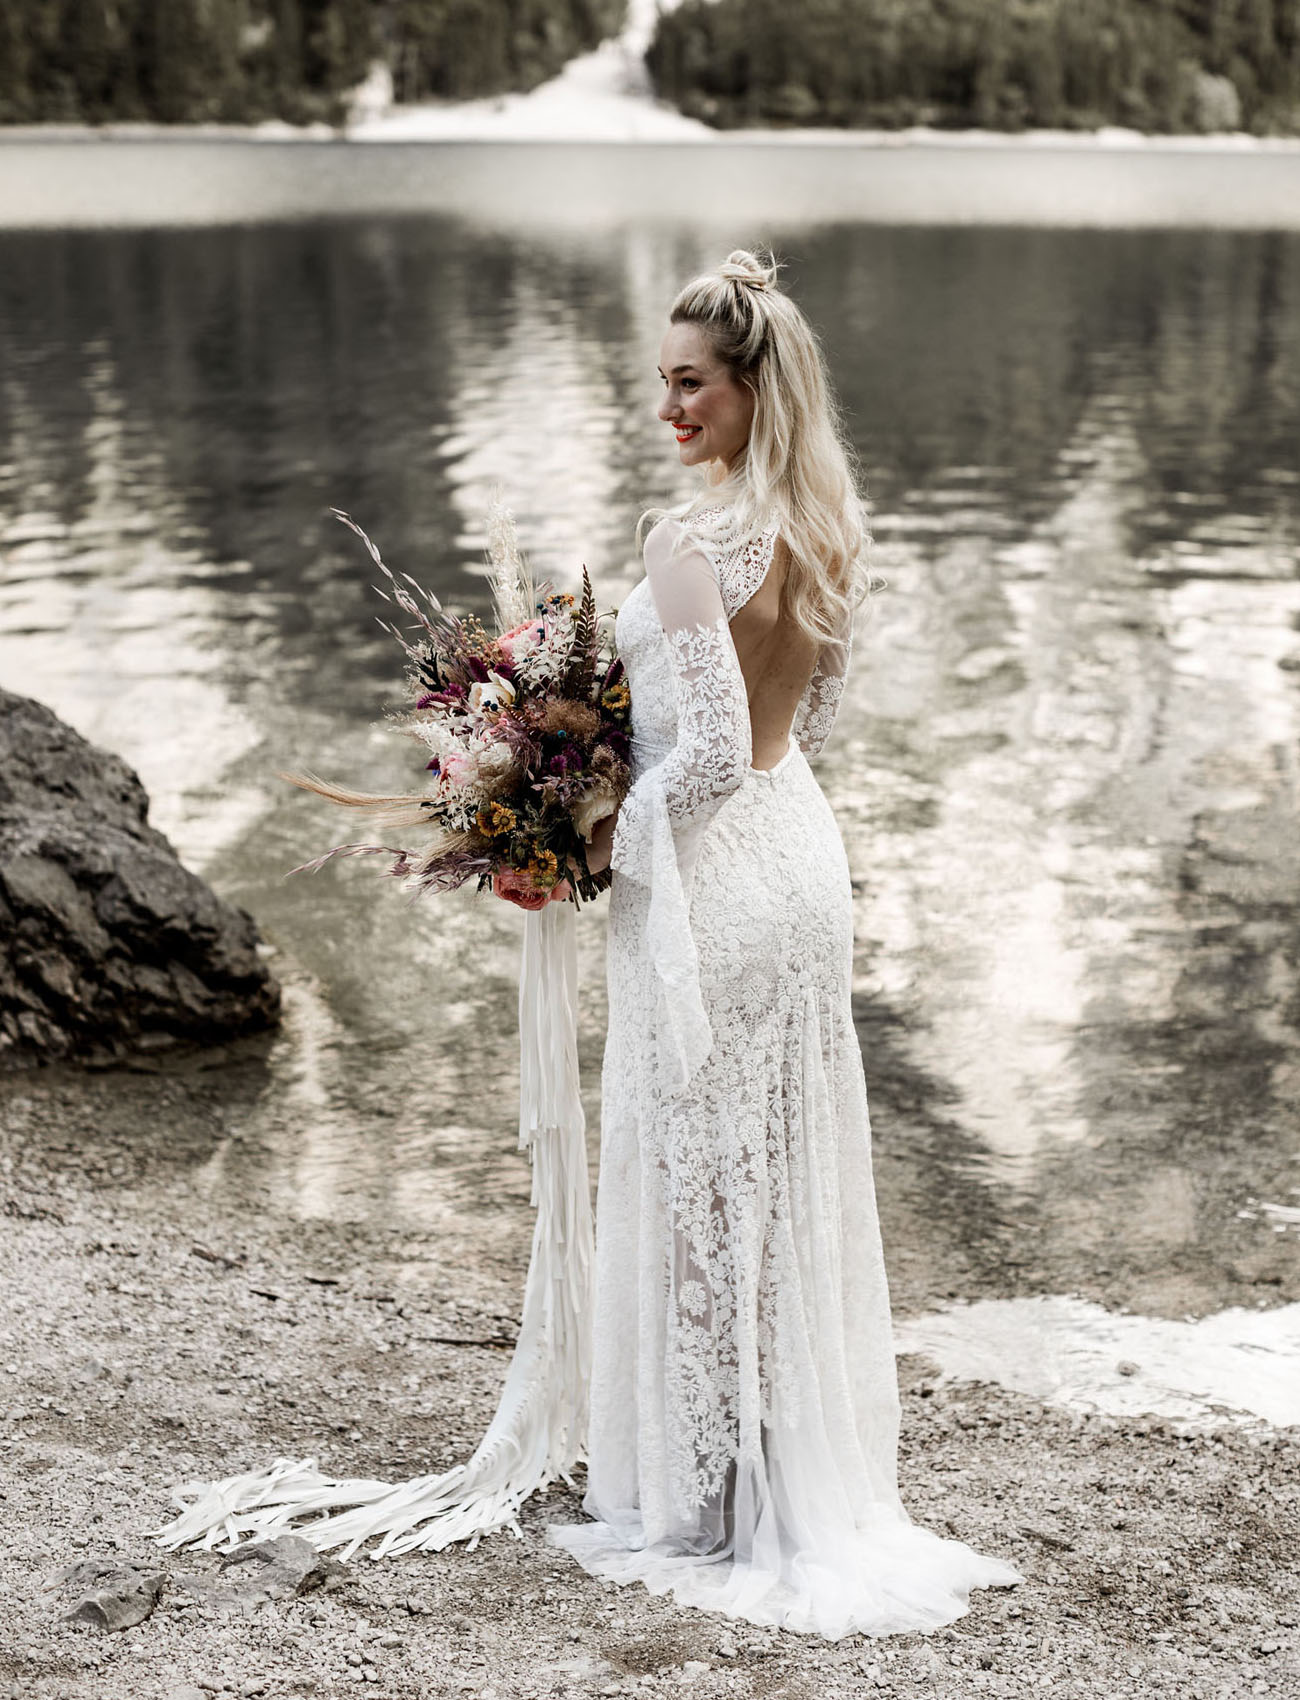 The boho lace wedding dress with wide sleeves and an open back looked very cool and the bouquet had ribbon that reminded of the dress